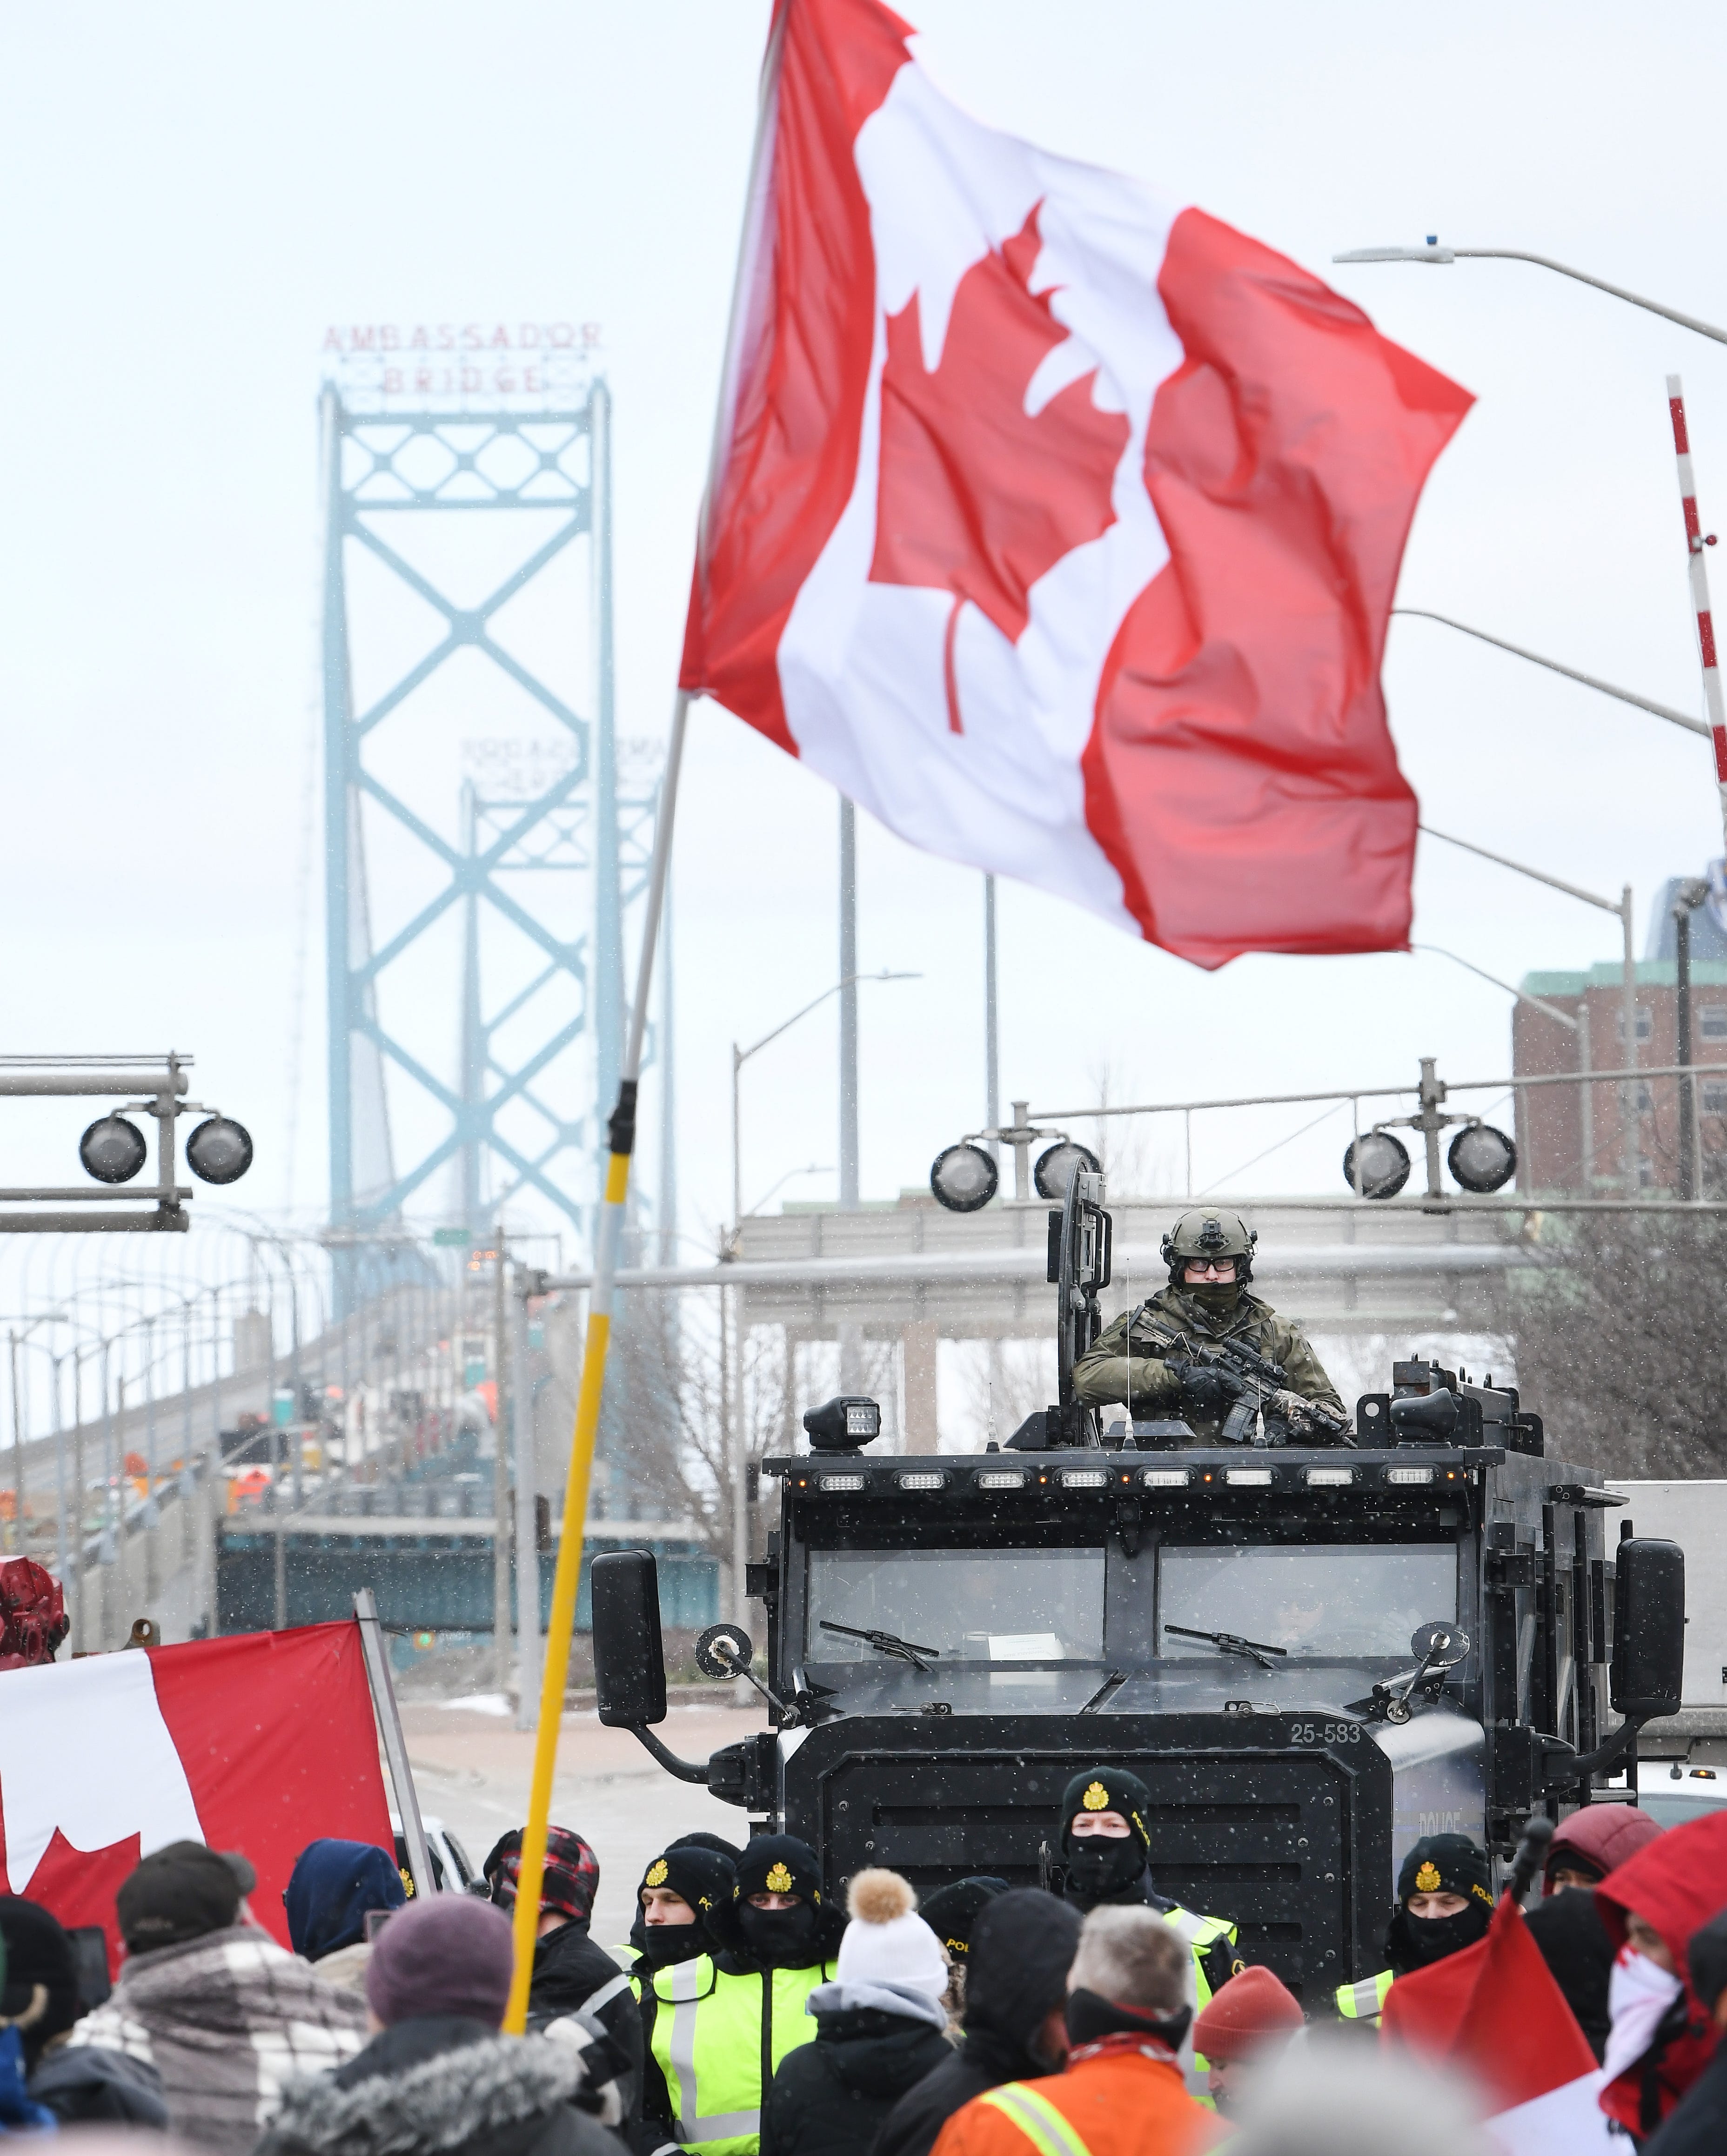 An armored vehicle slowly follows law enforcement officers as they walk a line through protestors unhappy over Canada ' s COVID mandates, near the Ambassador Bridge in Windsor, Canada, on February 12, 2022.